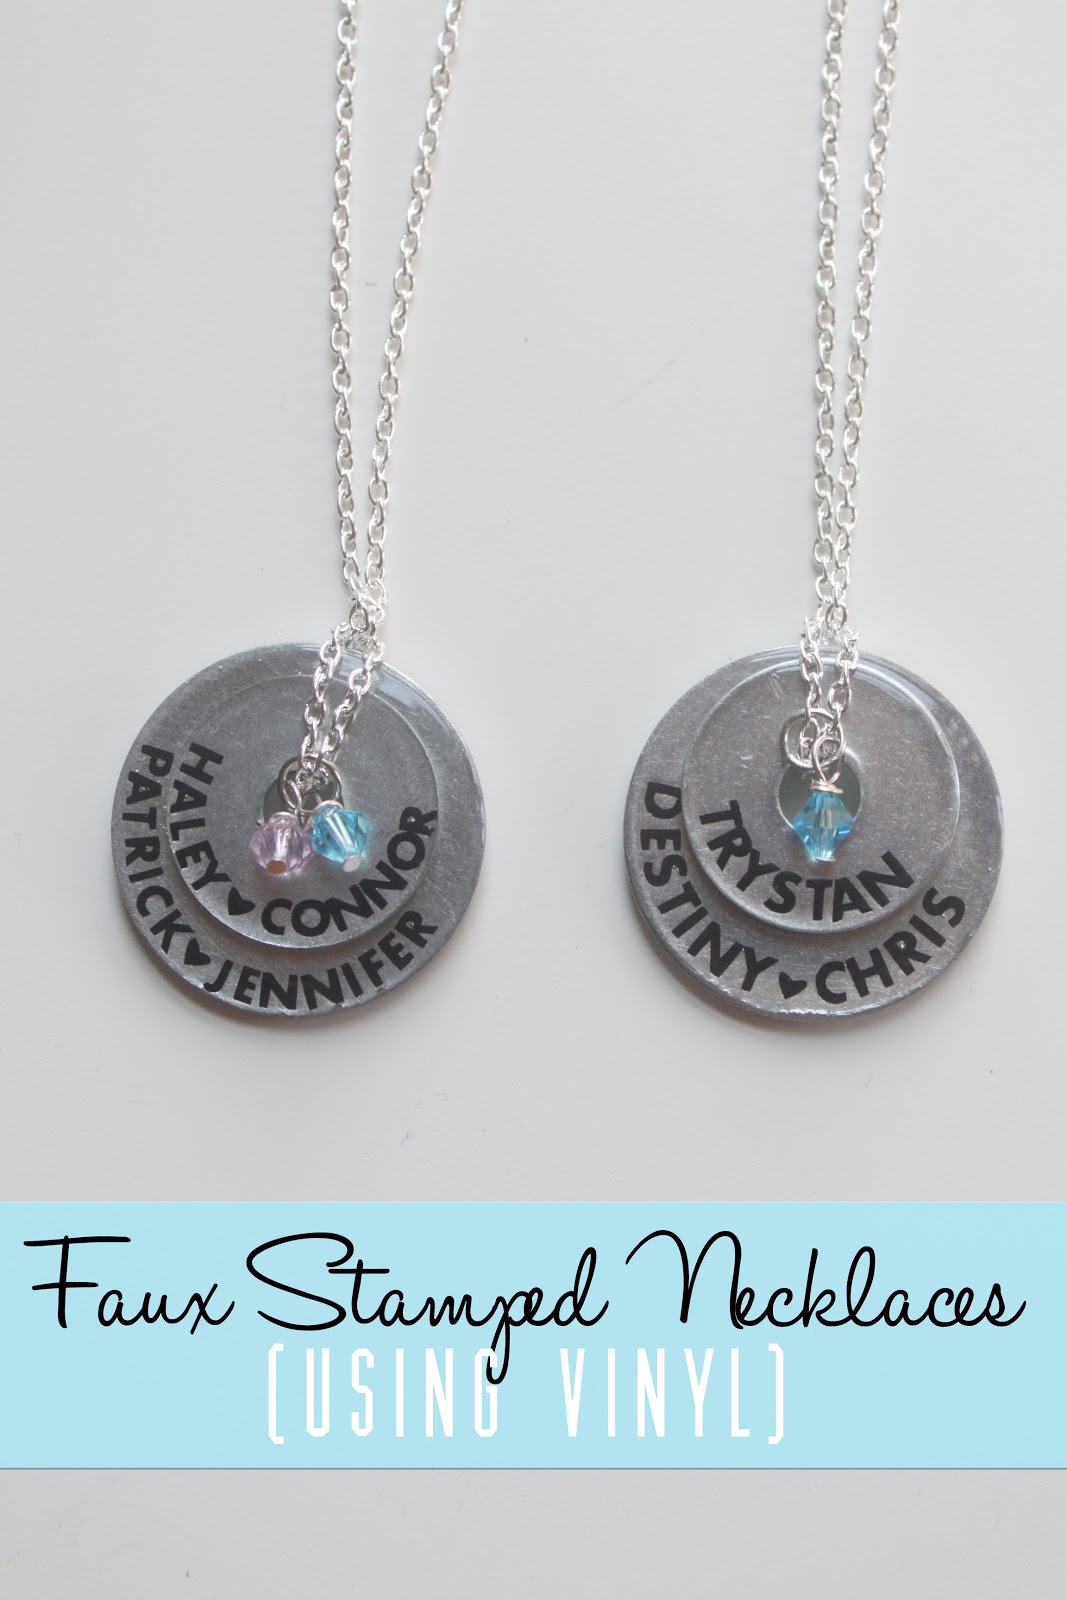 Faux Stamped Necklaces